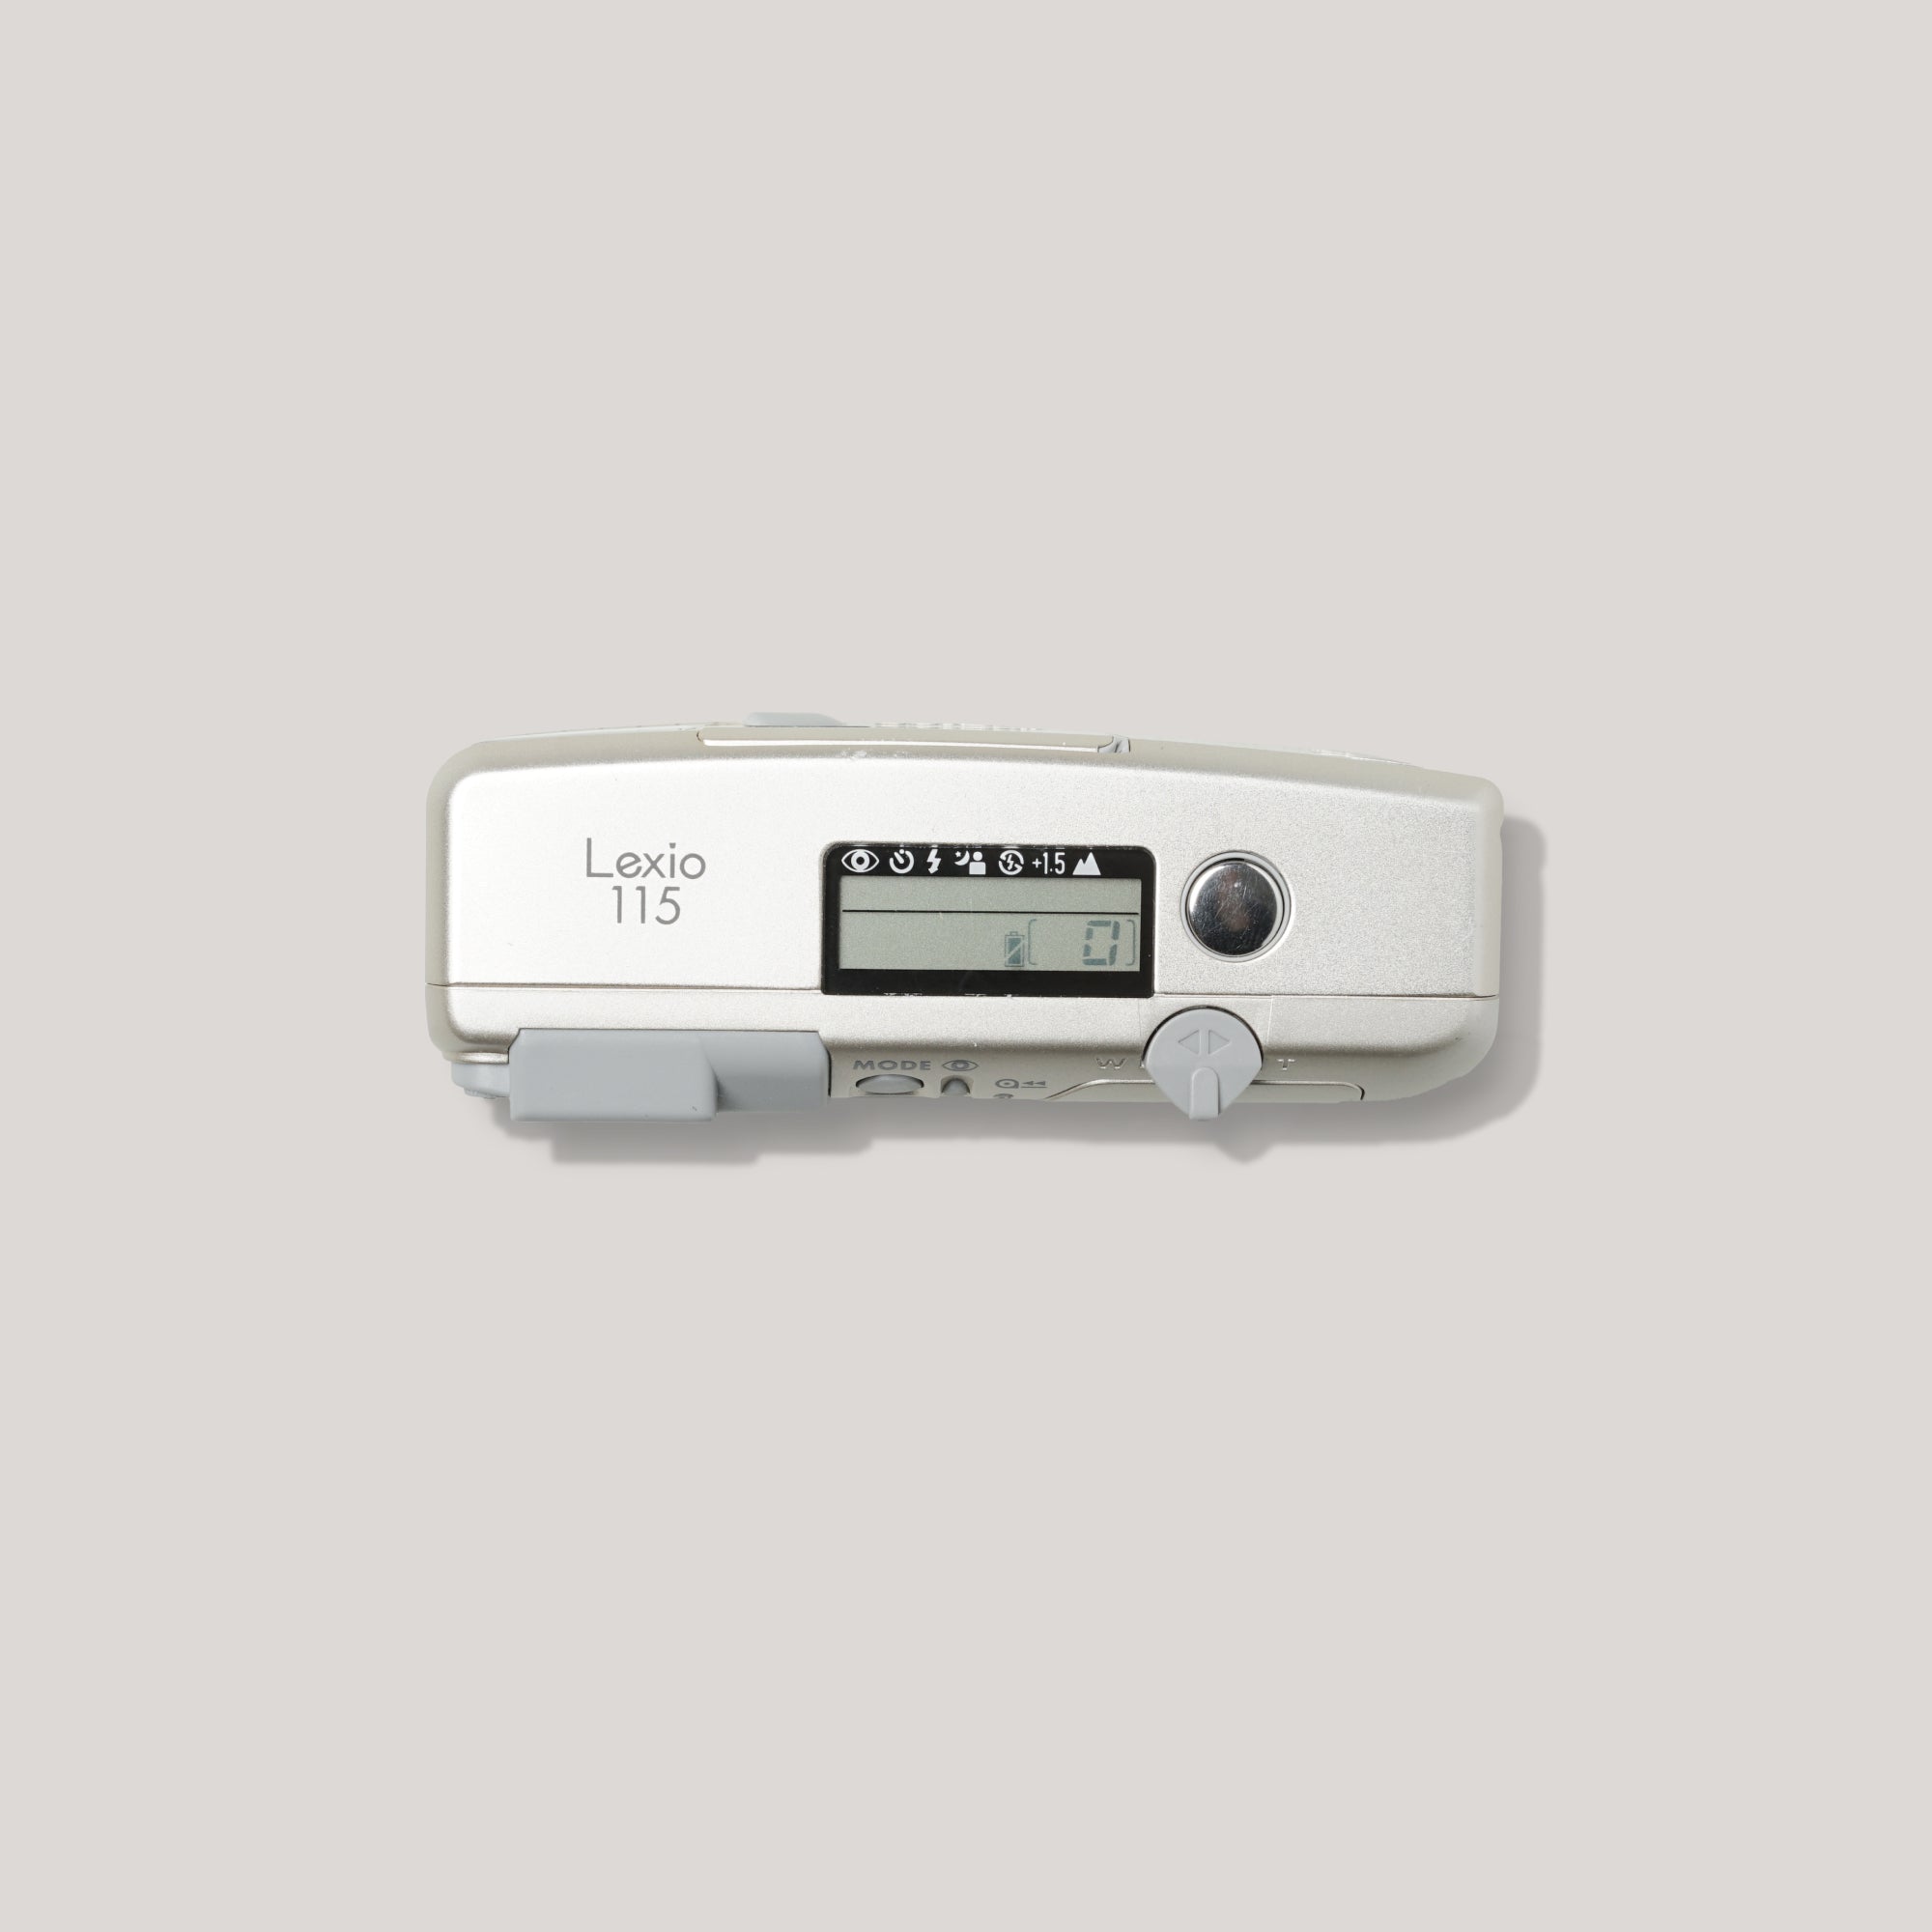 Buy Konica Lexio 115 now at Analogue Amsterdam